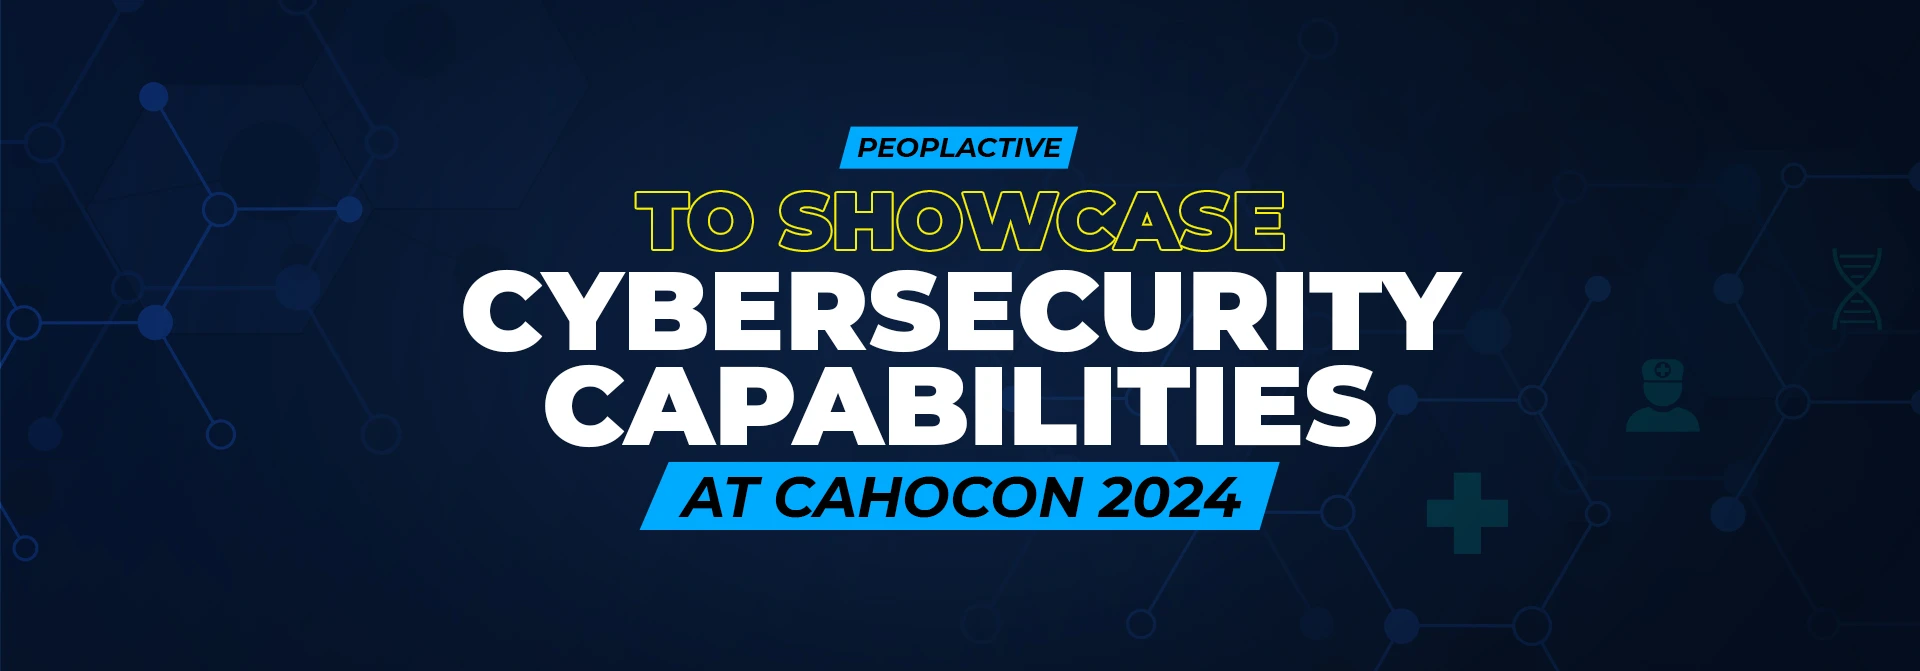 peoplactive to showcase cybersecurity capabilities at cahocon 2024